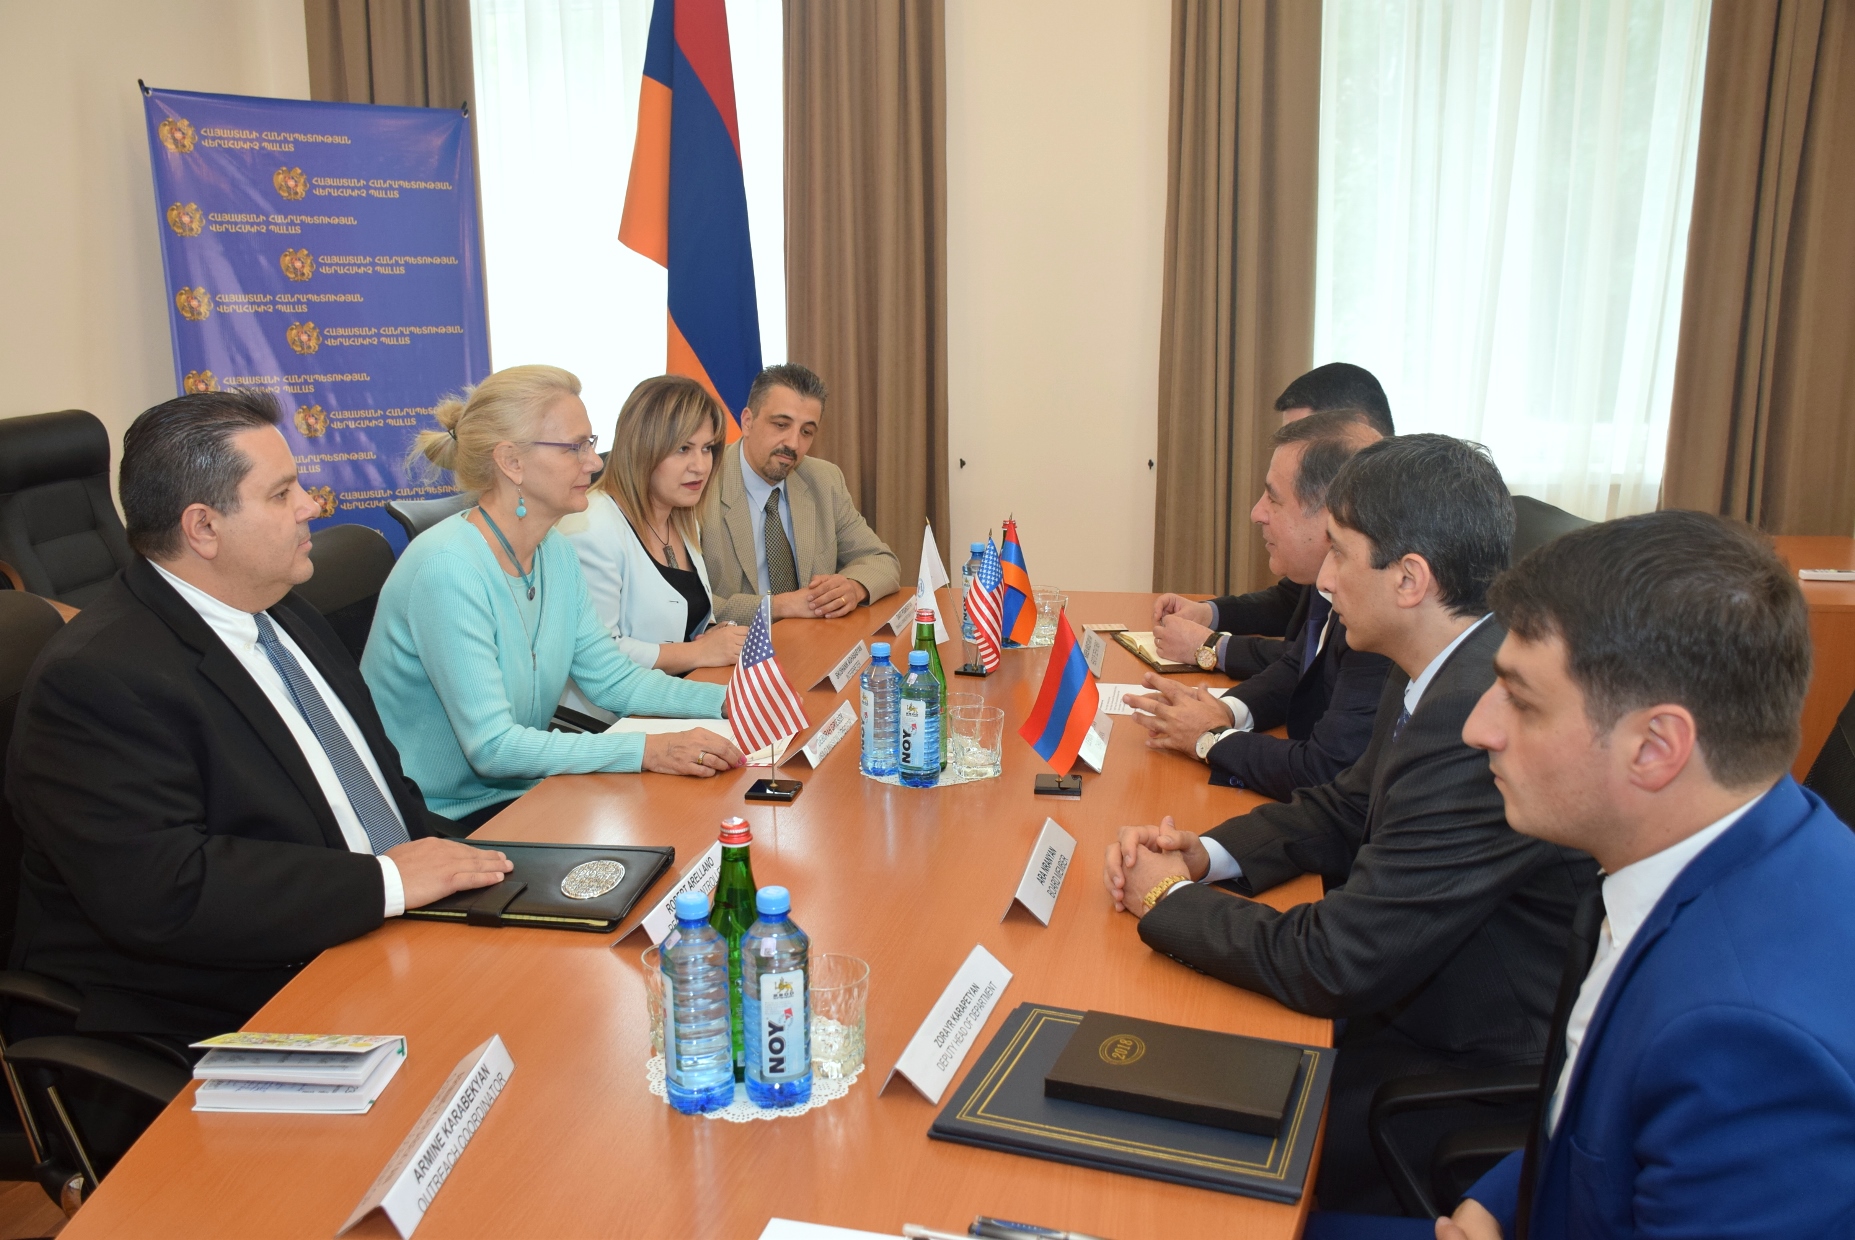 USAID and Audit chamber of Armenia to cooperate